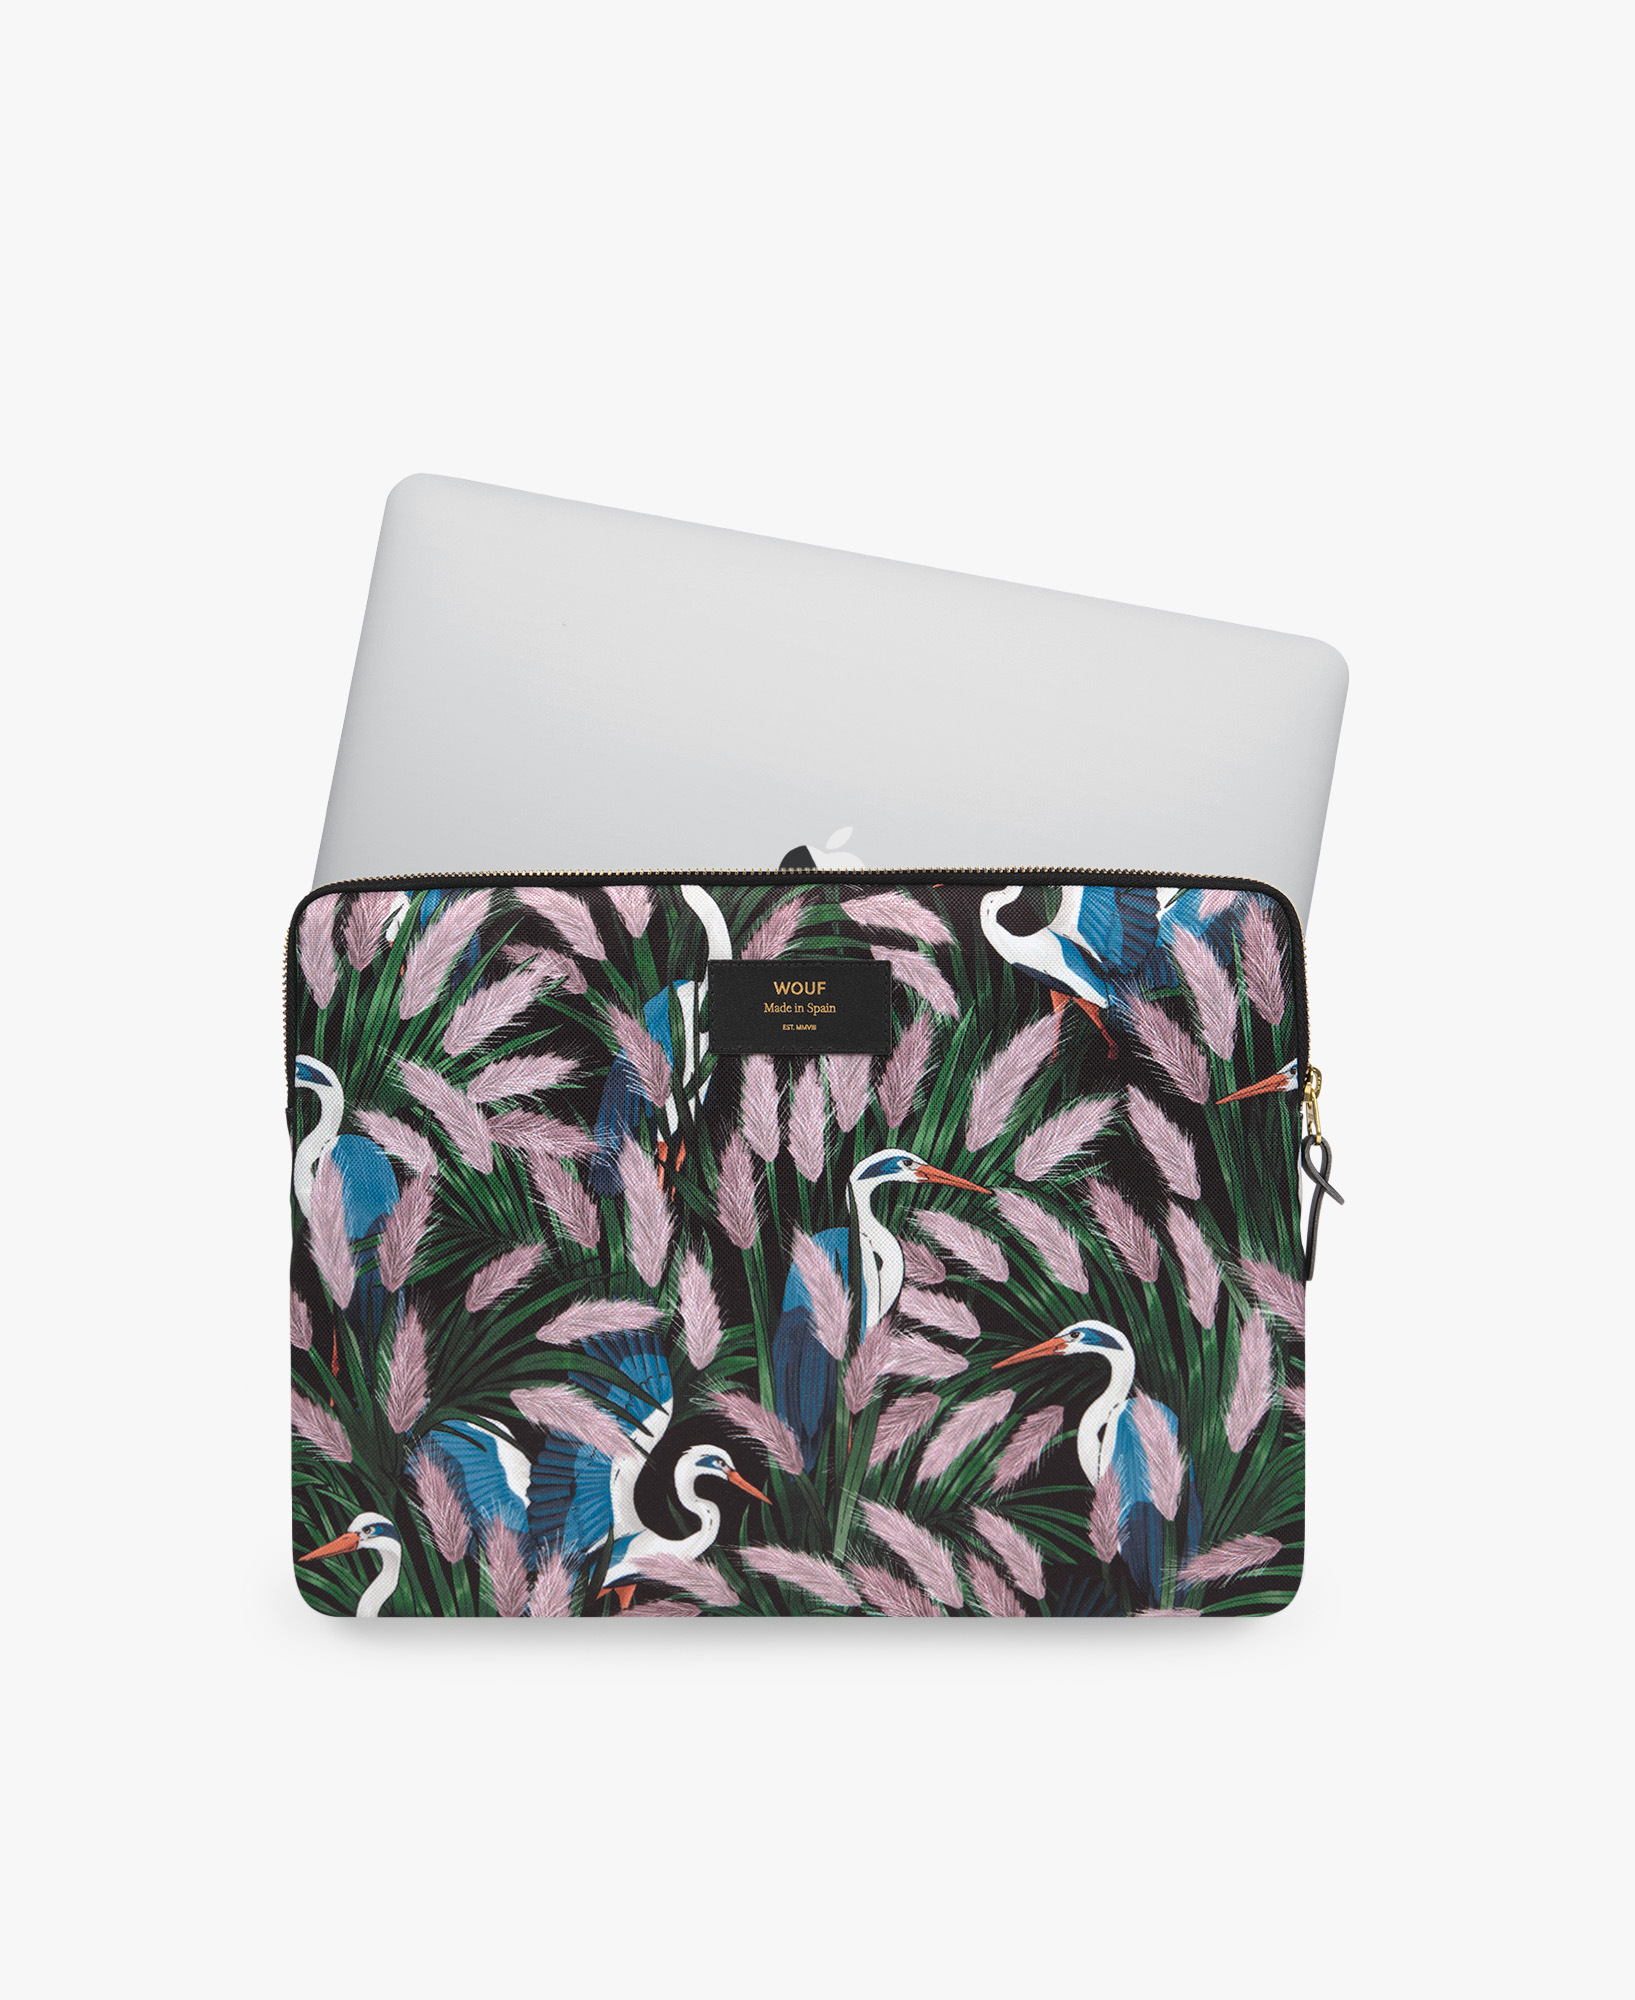 WOUF-13-Laptop-Sleeve-Lucy-Usage